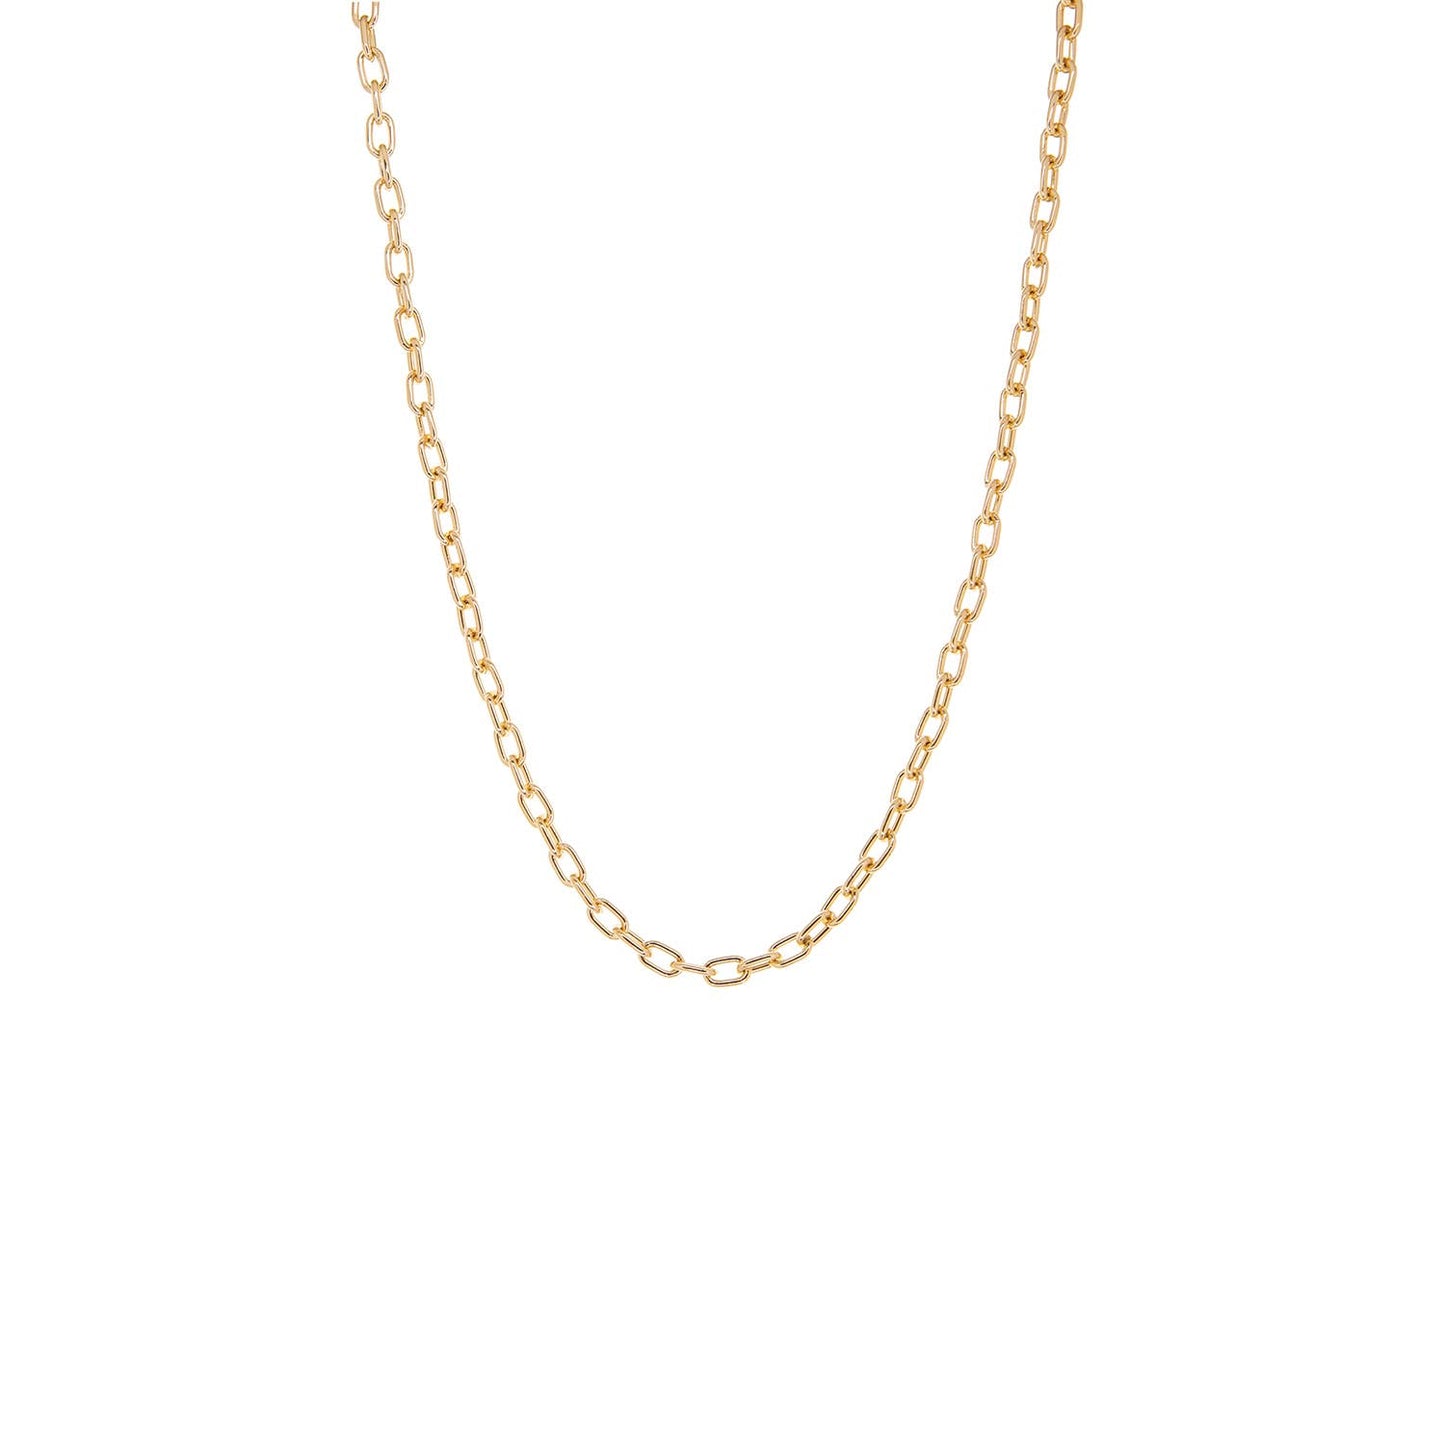 Gold plated 20" cable chain link necklace